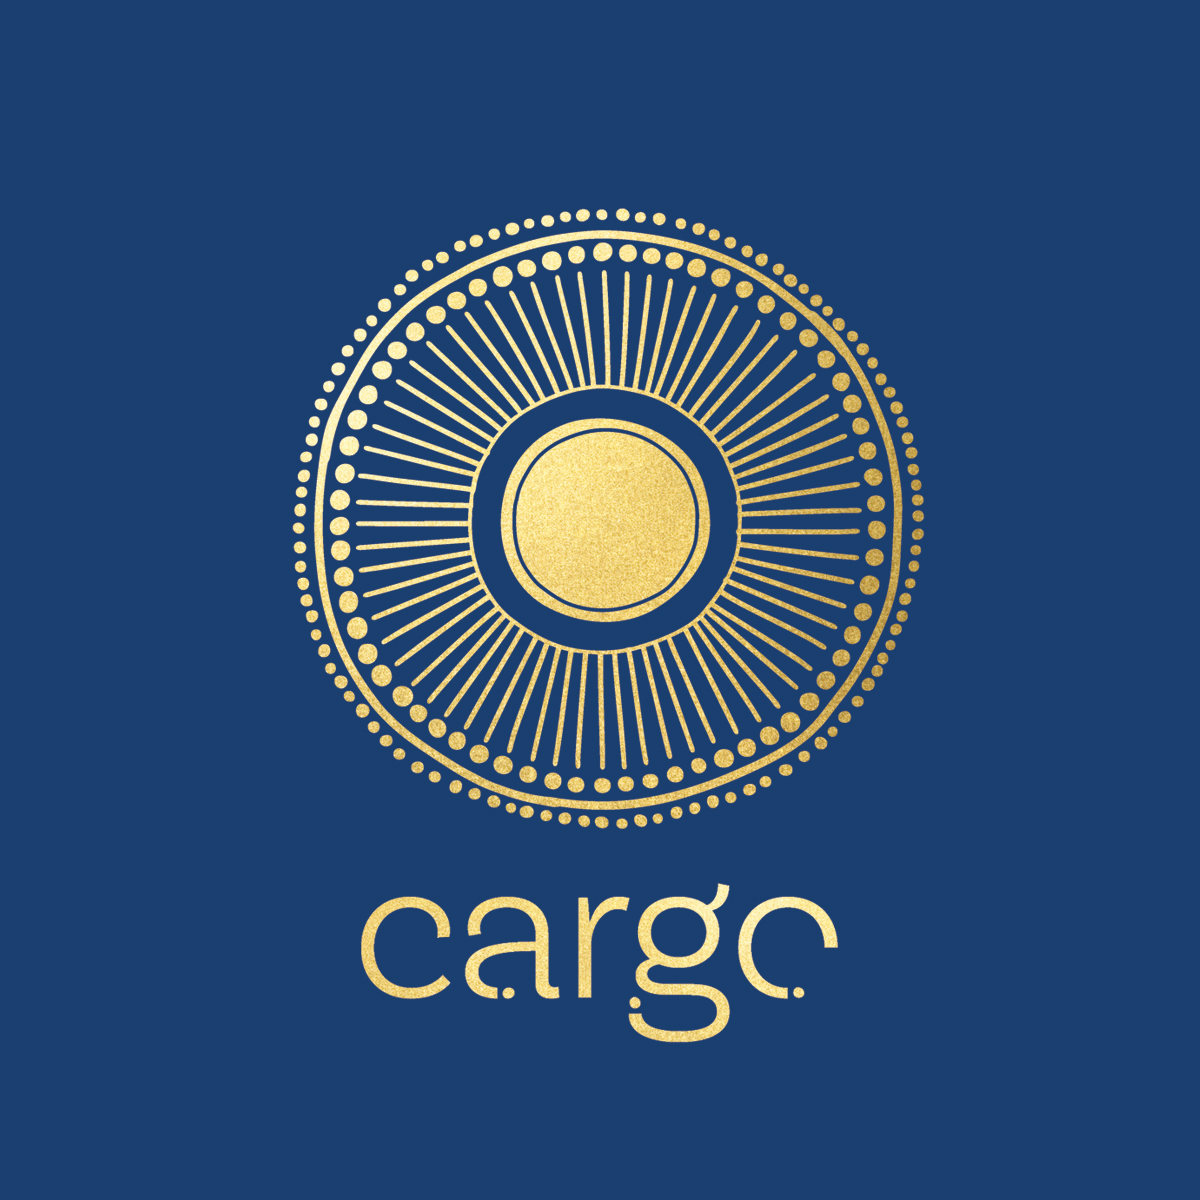 Cargo Caterging Co Logo 1